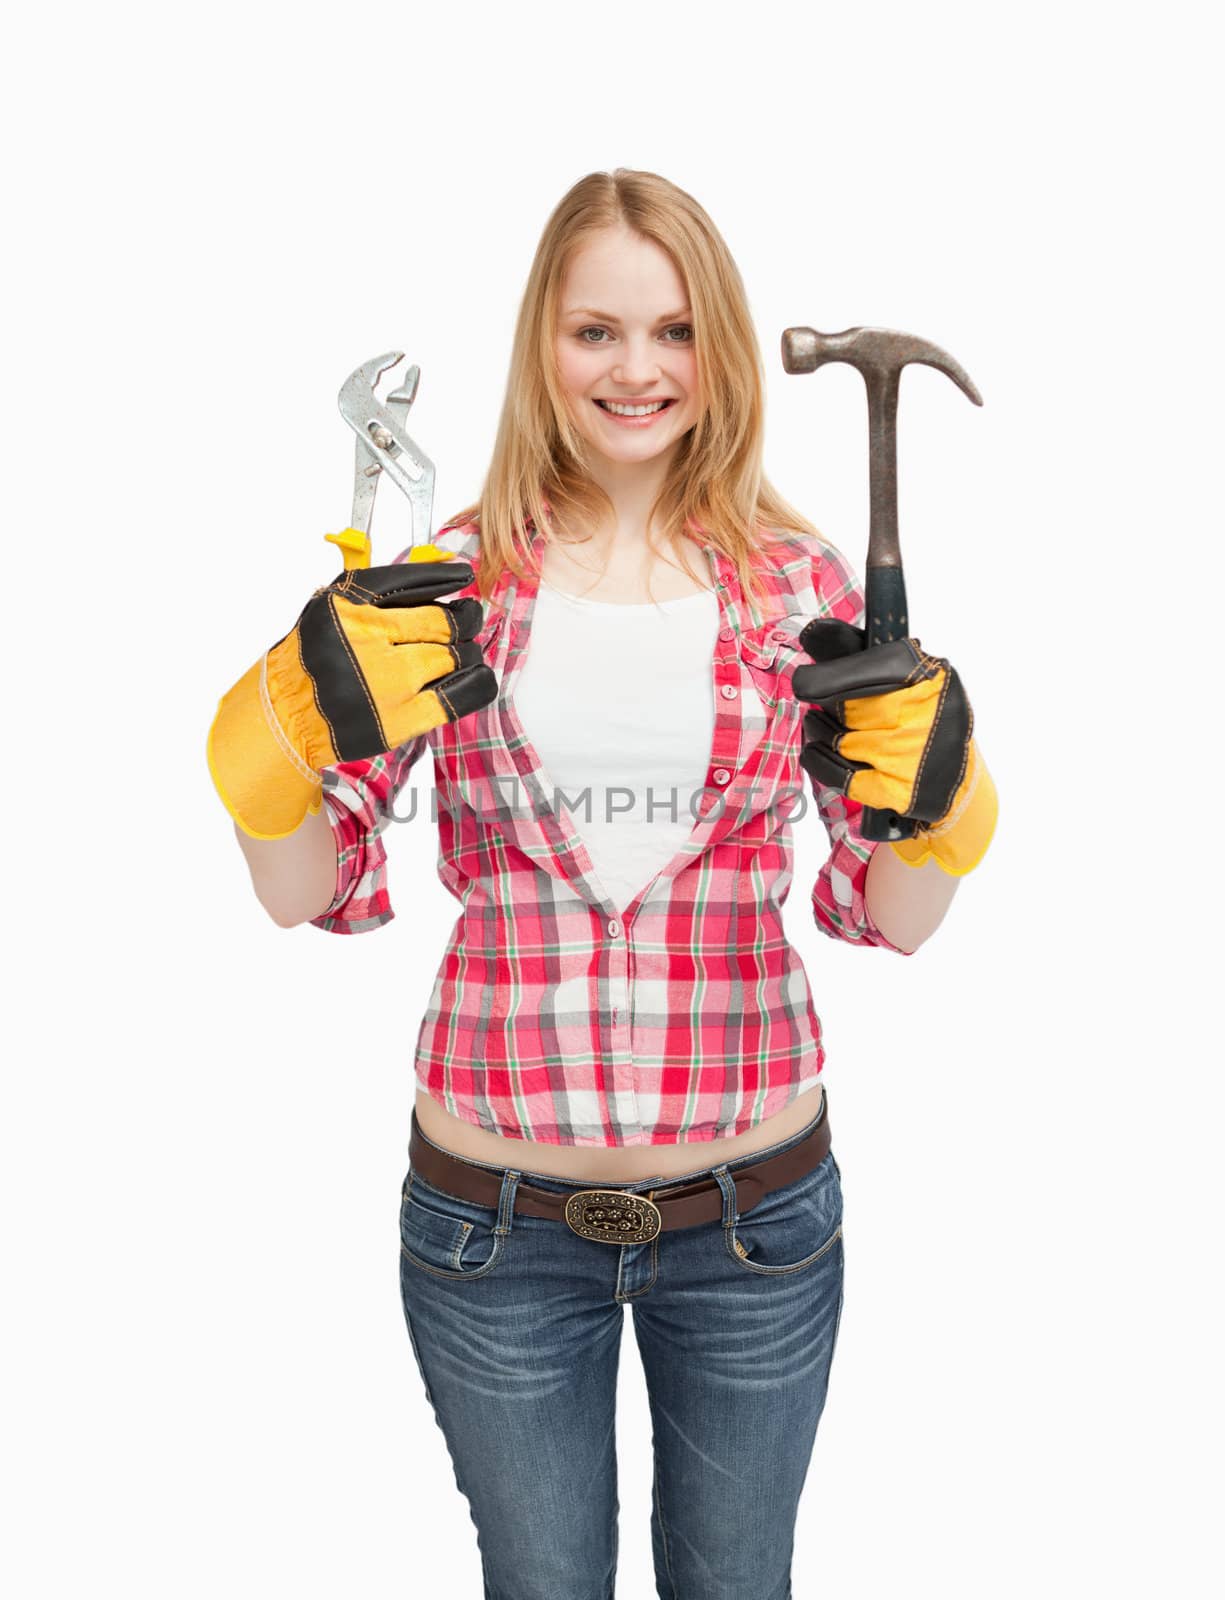 Cheerful woman holding tools against white background